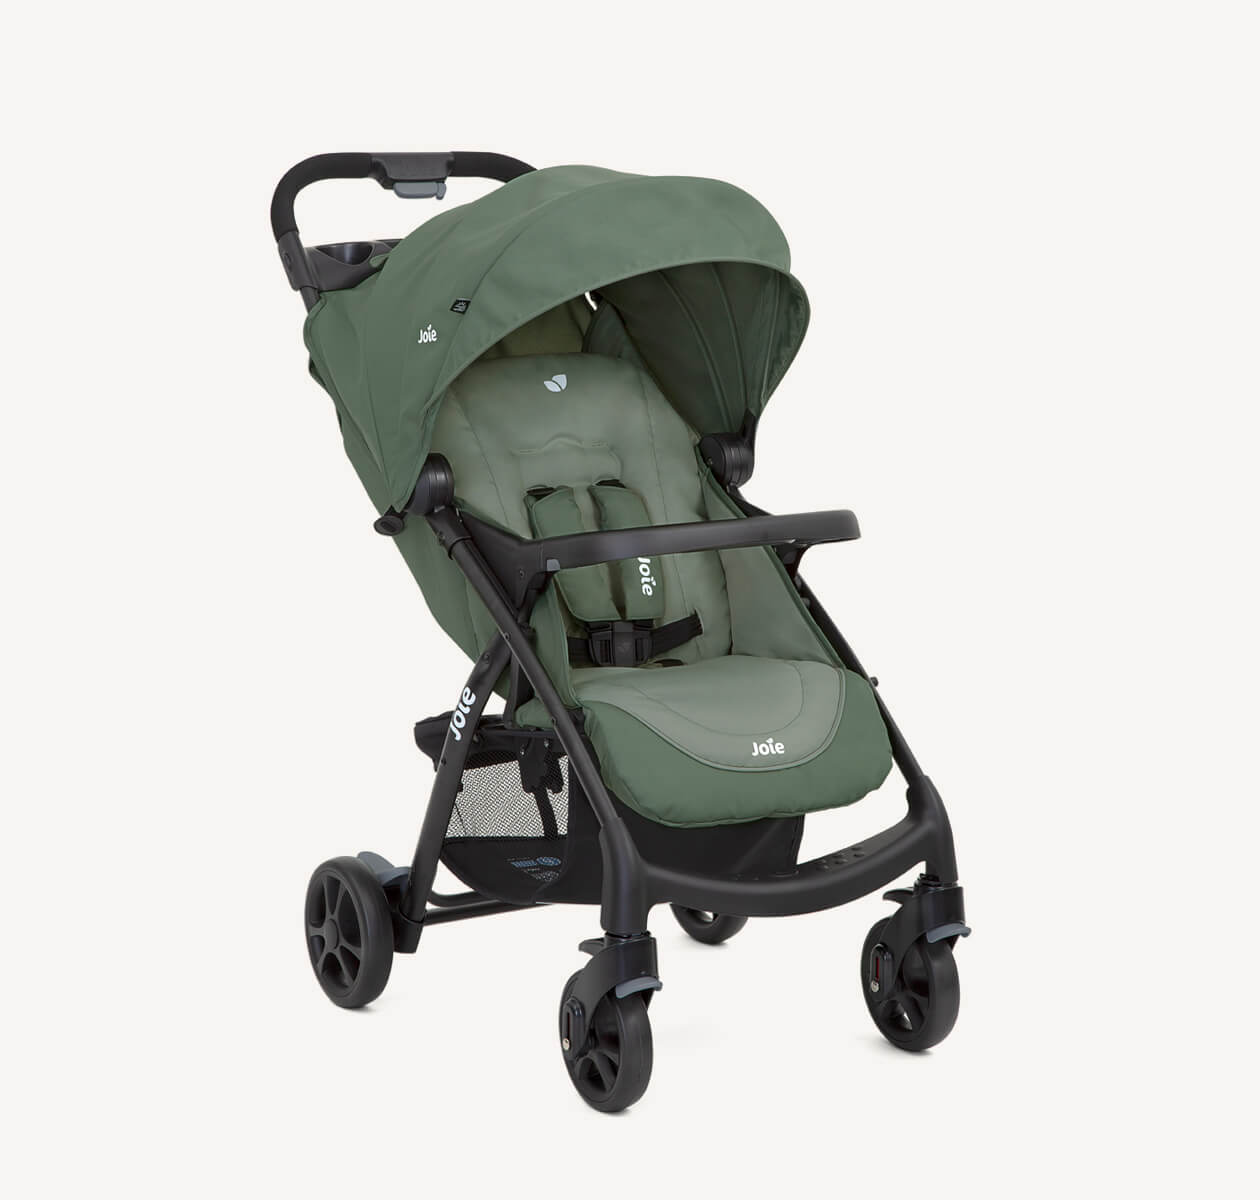 Joie light green muze lx stroller positioned at a right angle.